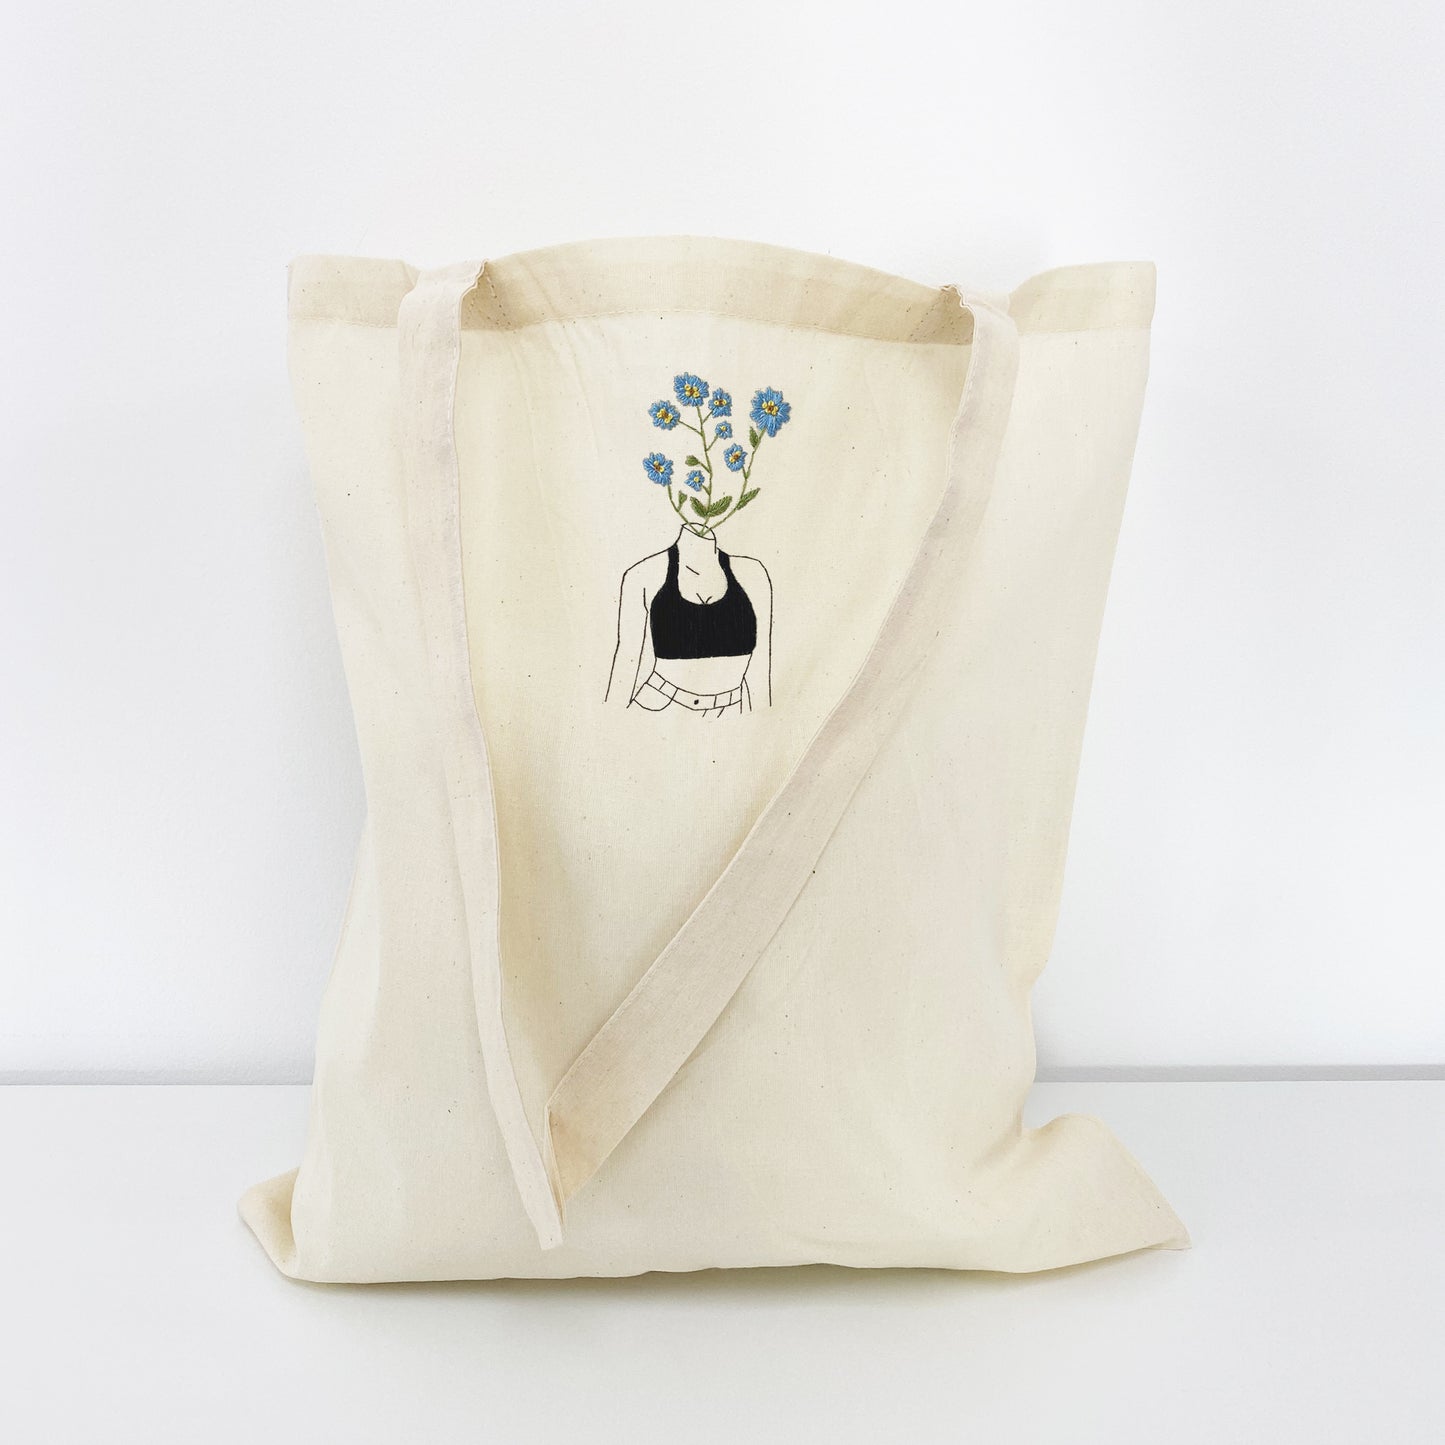 Forget Me Not Tote Bag Embroidery Kit